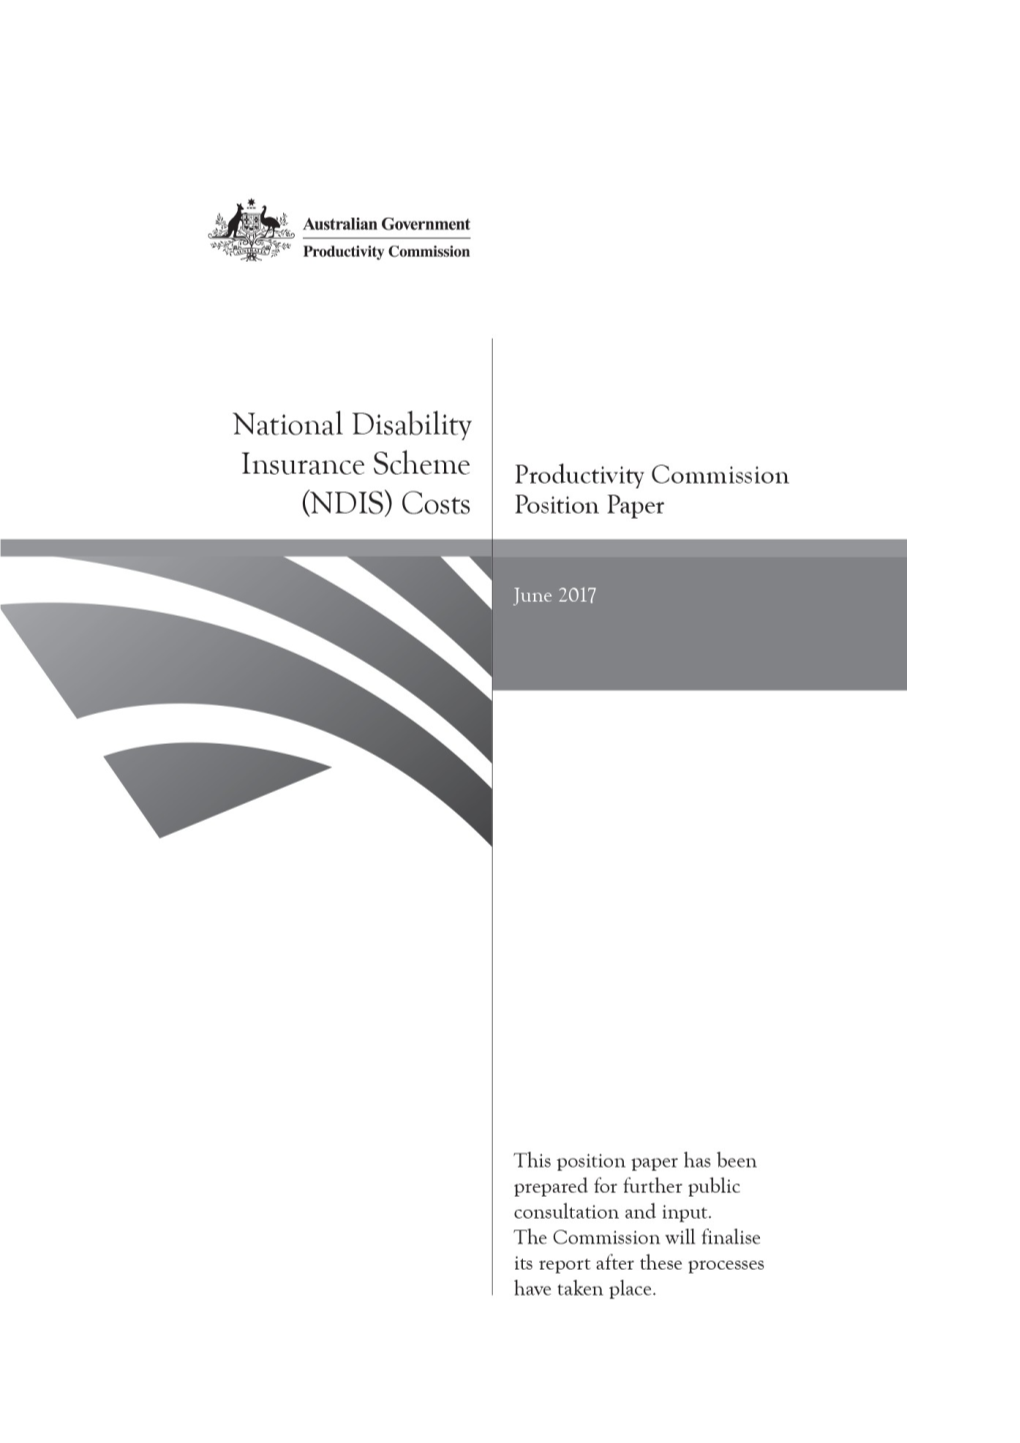 National Disability Insurance Scheme (NDIS) Costs - Position Paper